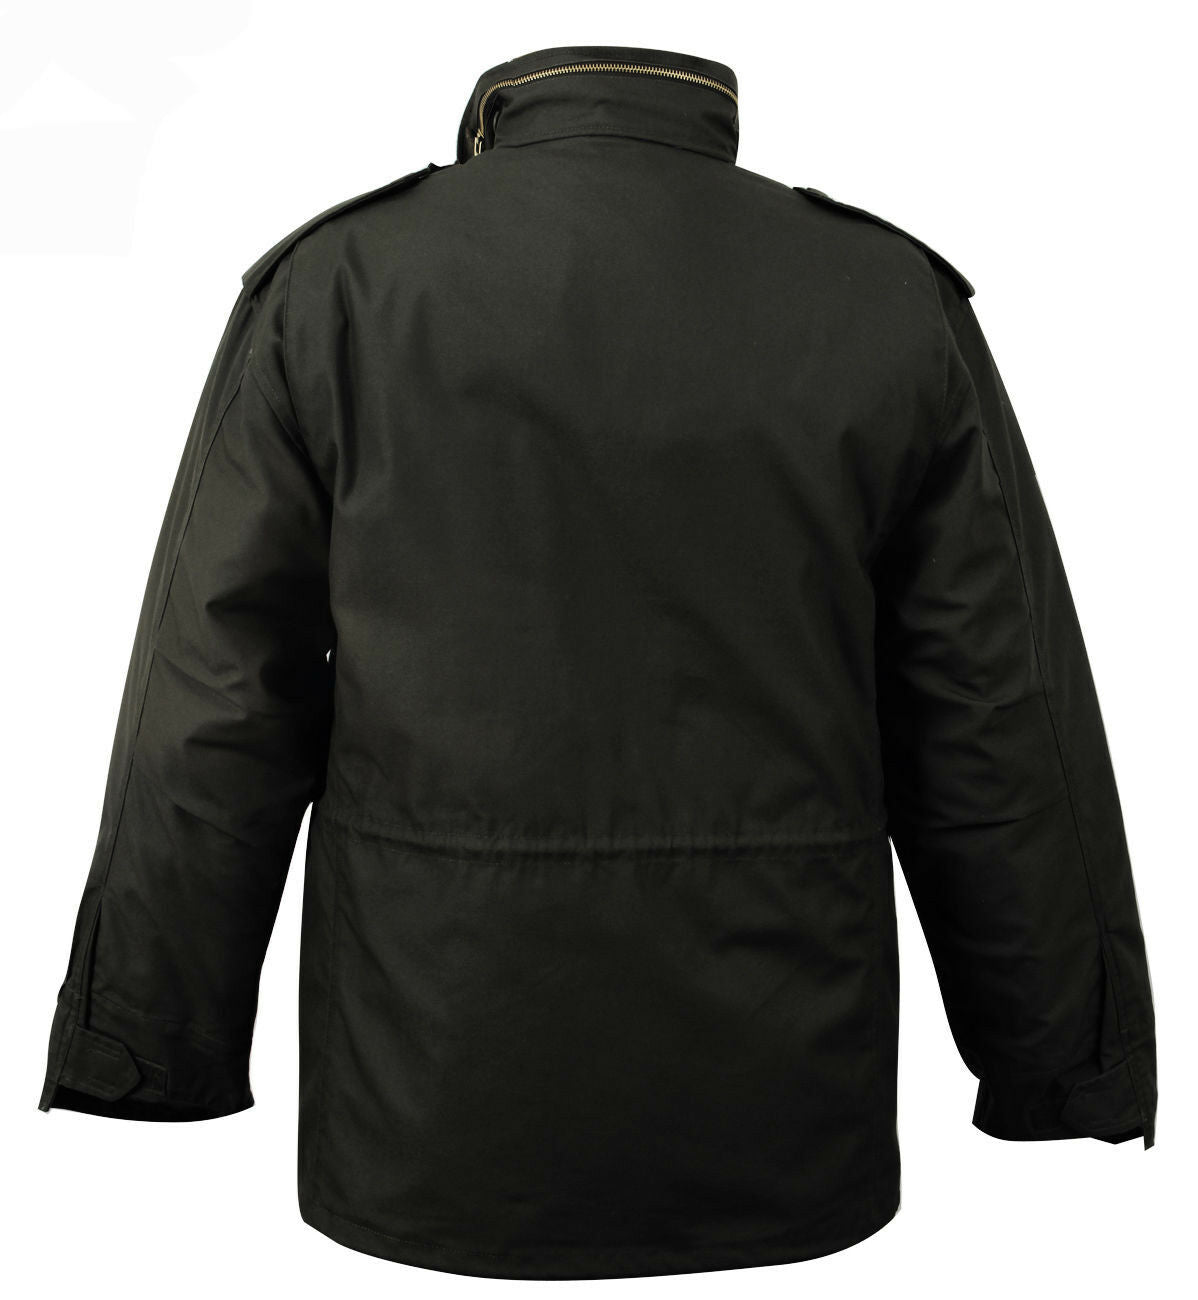 Rothco M-65 Field Jacket With Liner - Black